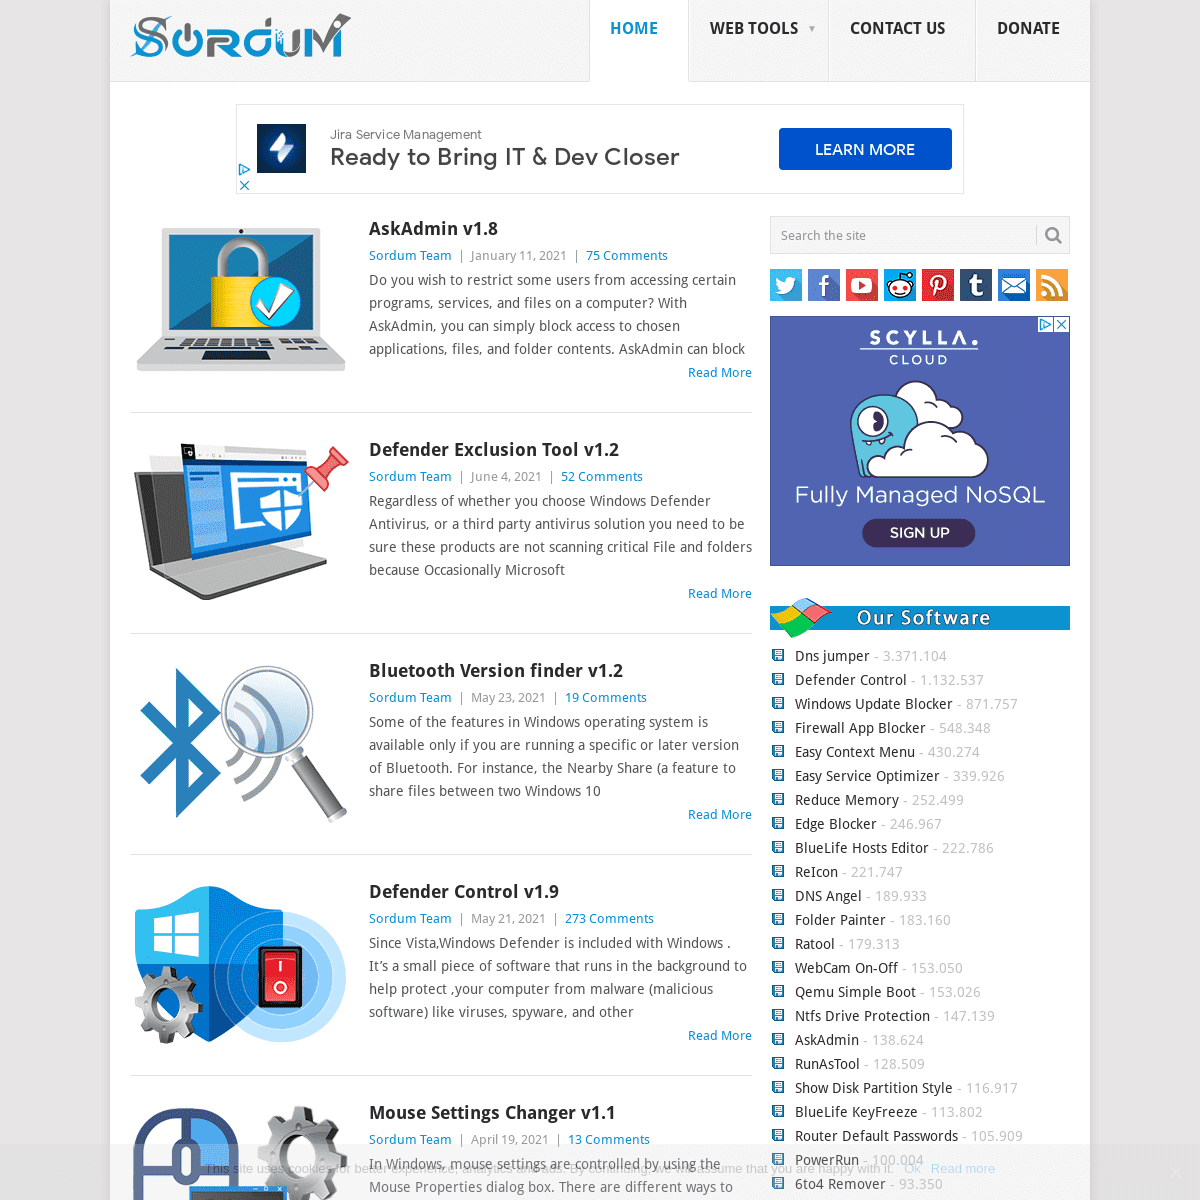 A complete backup of https://sordum.org